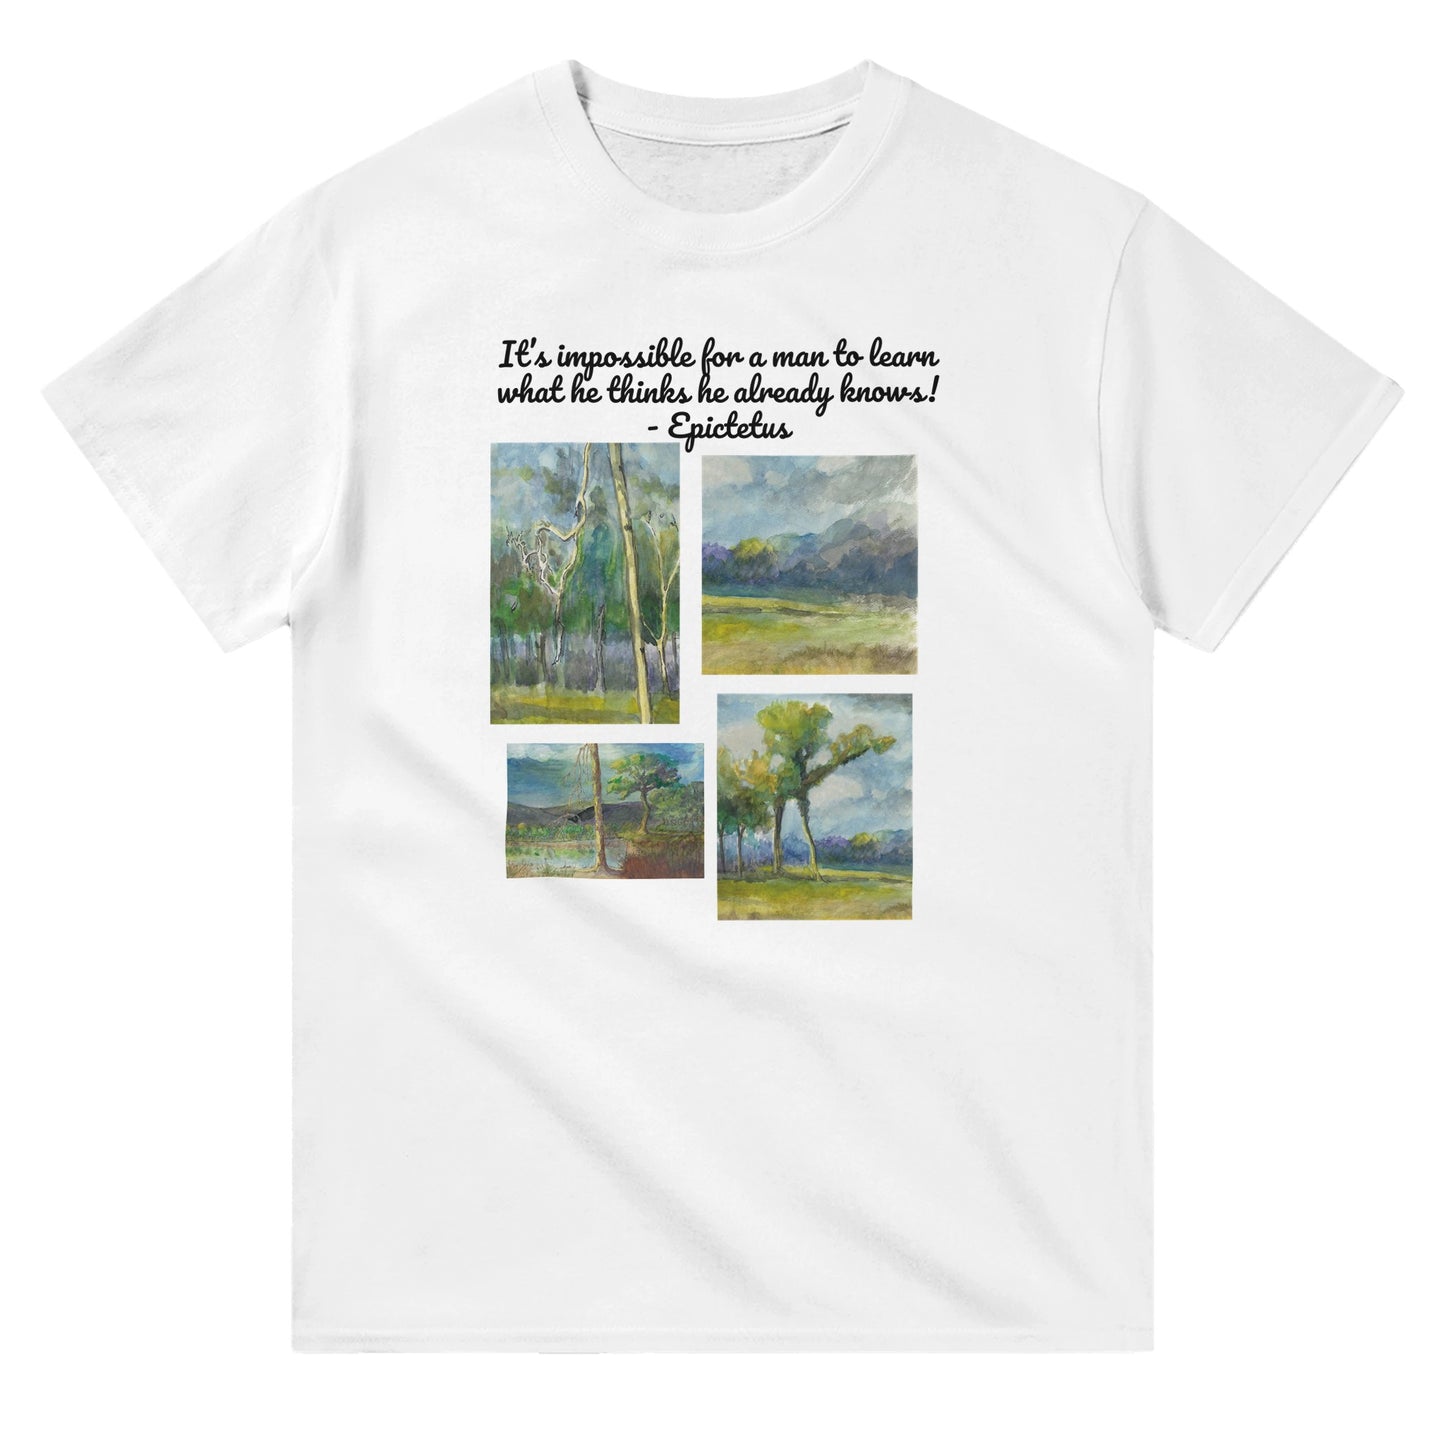 A white heavyweight Unisex Crewneck cotton t-shirt with original artwork It’s impossible for a man to learn what he thinks he already knows! on the front from WhatYa Say Apparel lying flat.